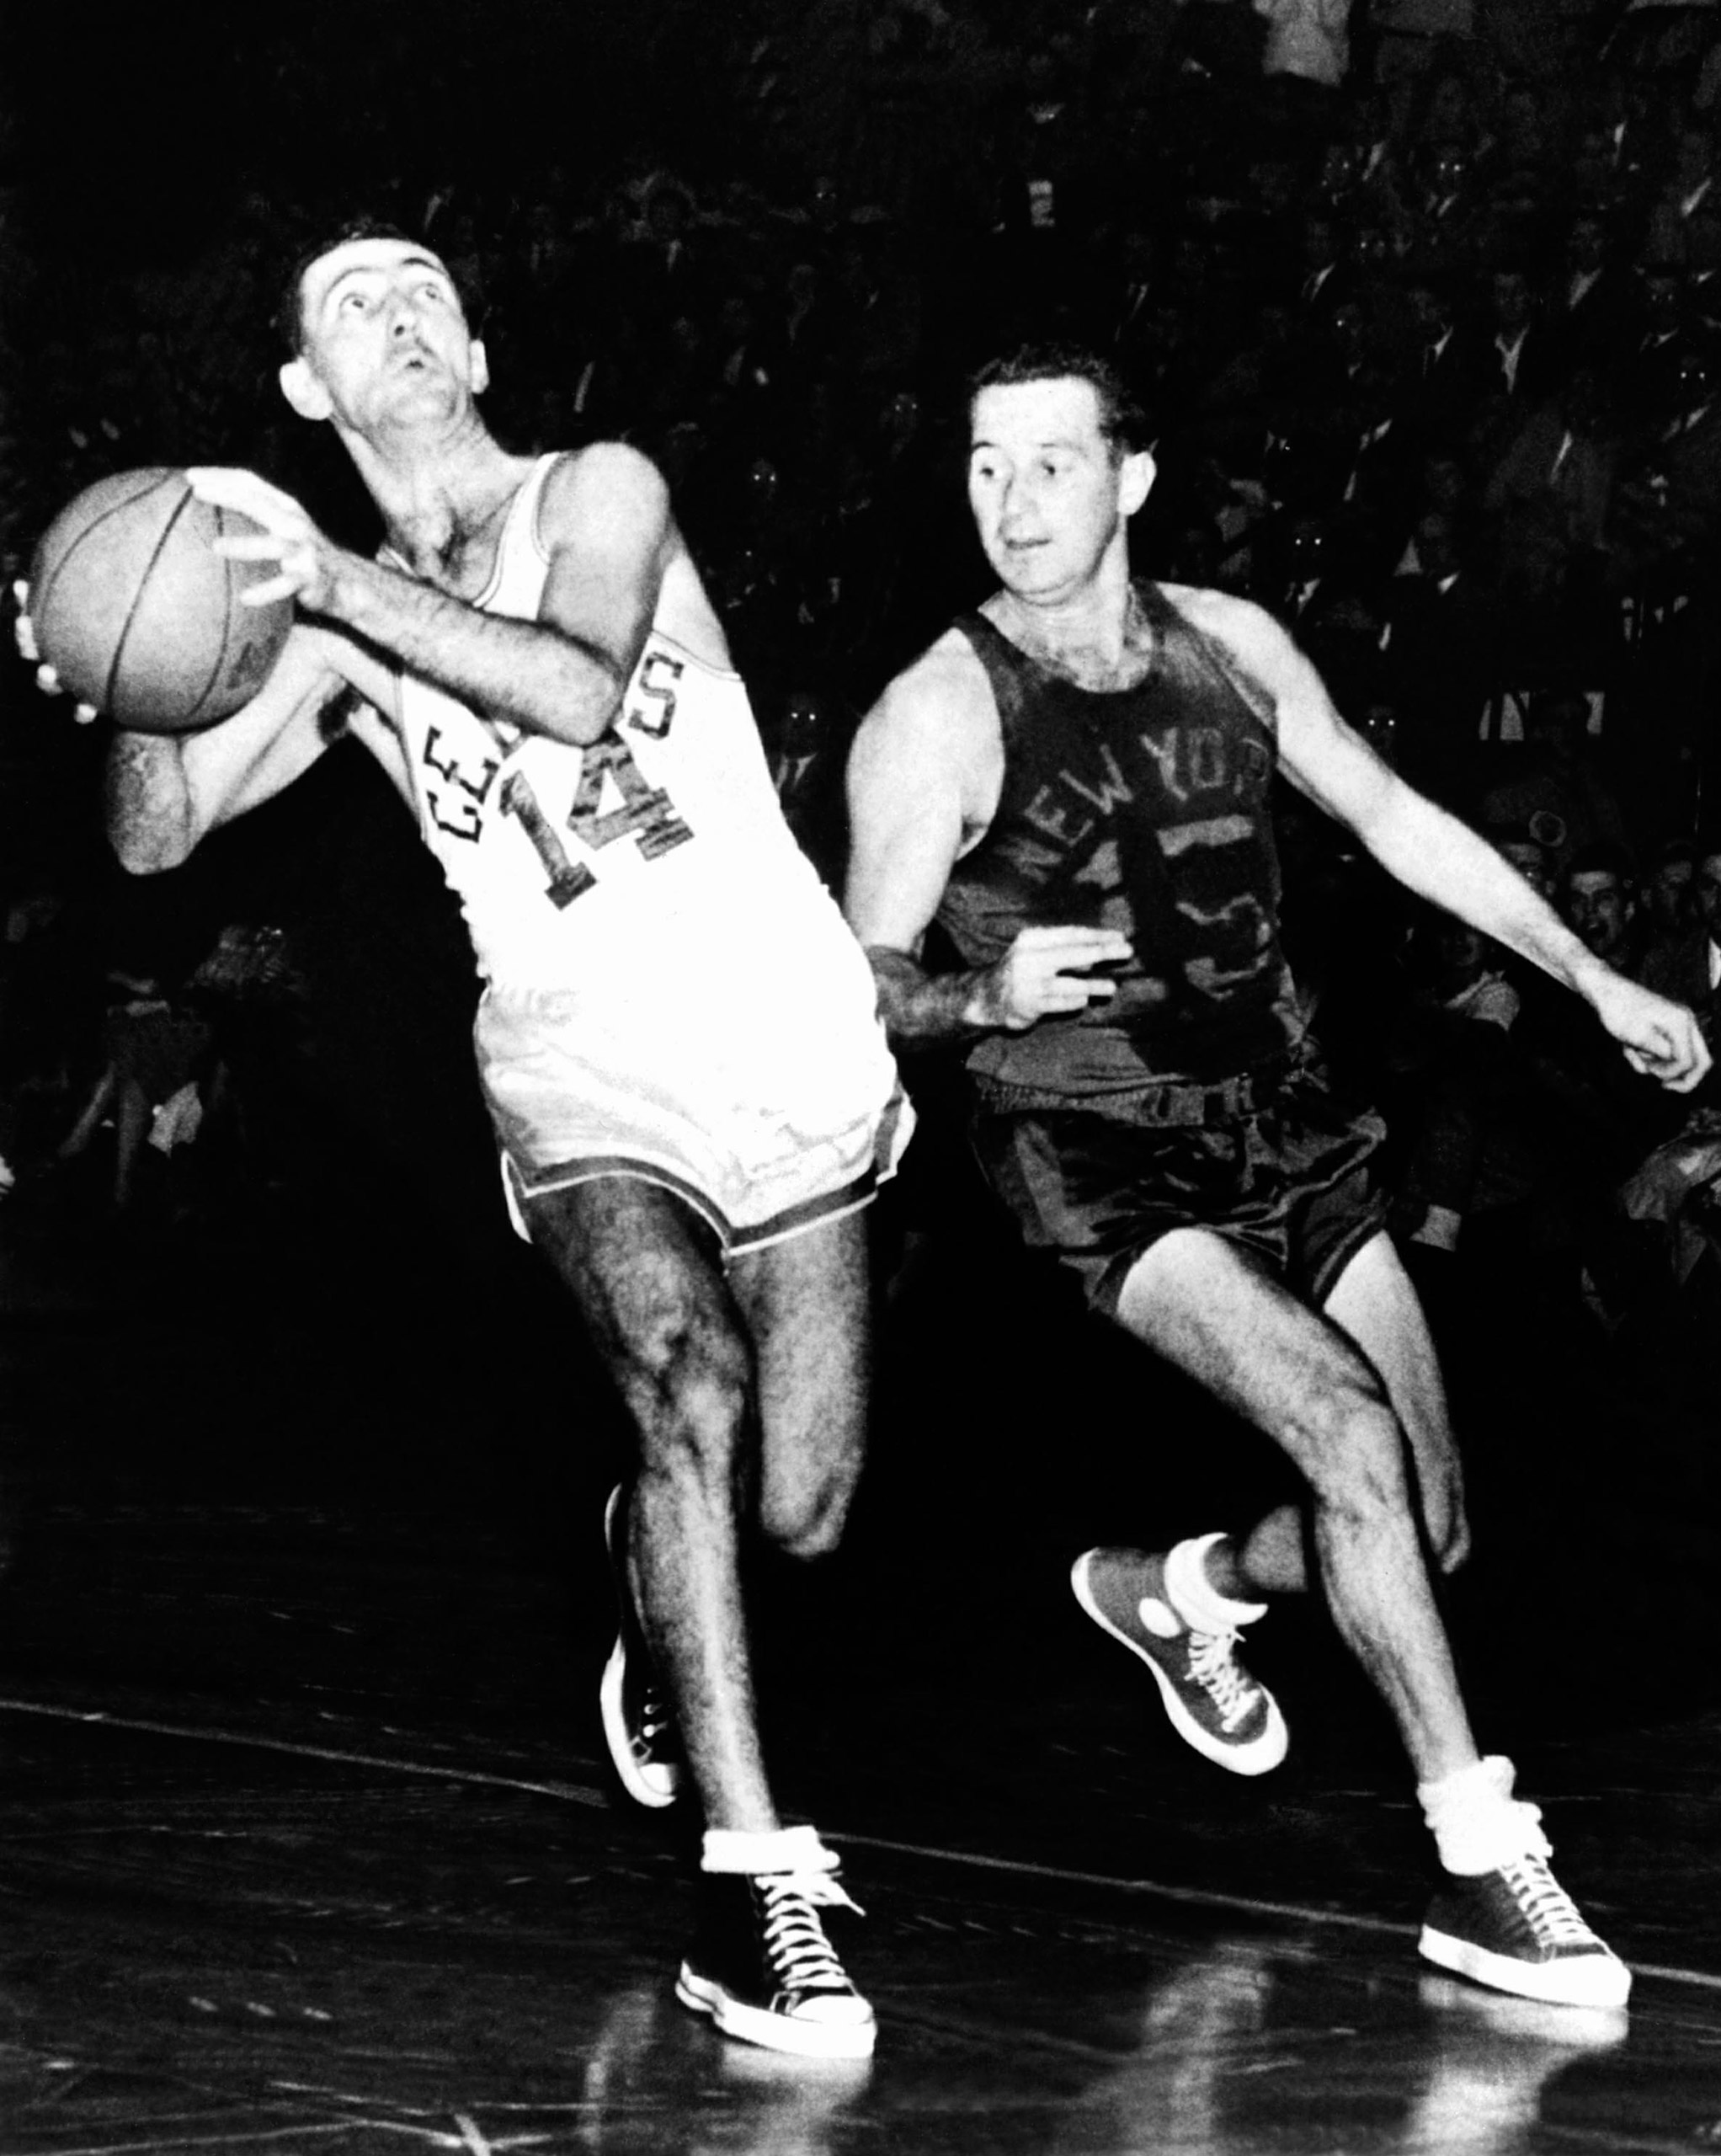 Bob Cousy #14 of the Boston Celtics drives to the basket against Dick McGuire #15 of the New York Knicks at the Boston Garden circa 1950 in Boston, Massachusetts.